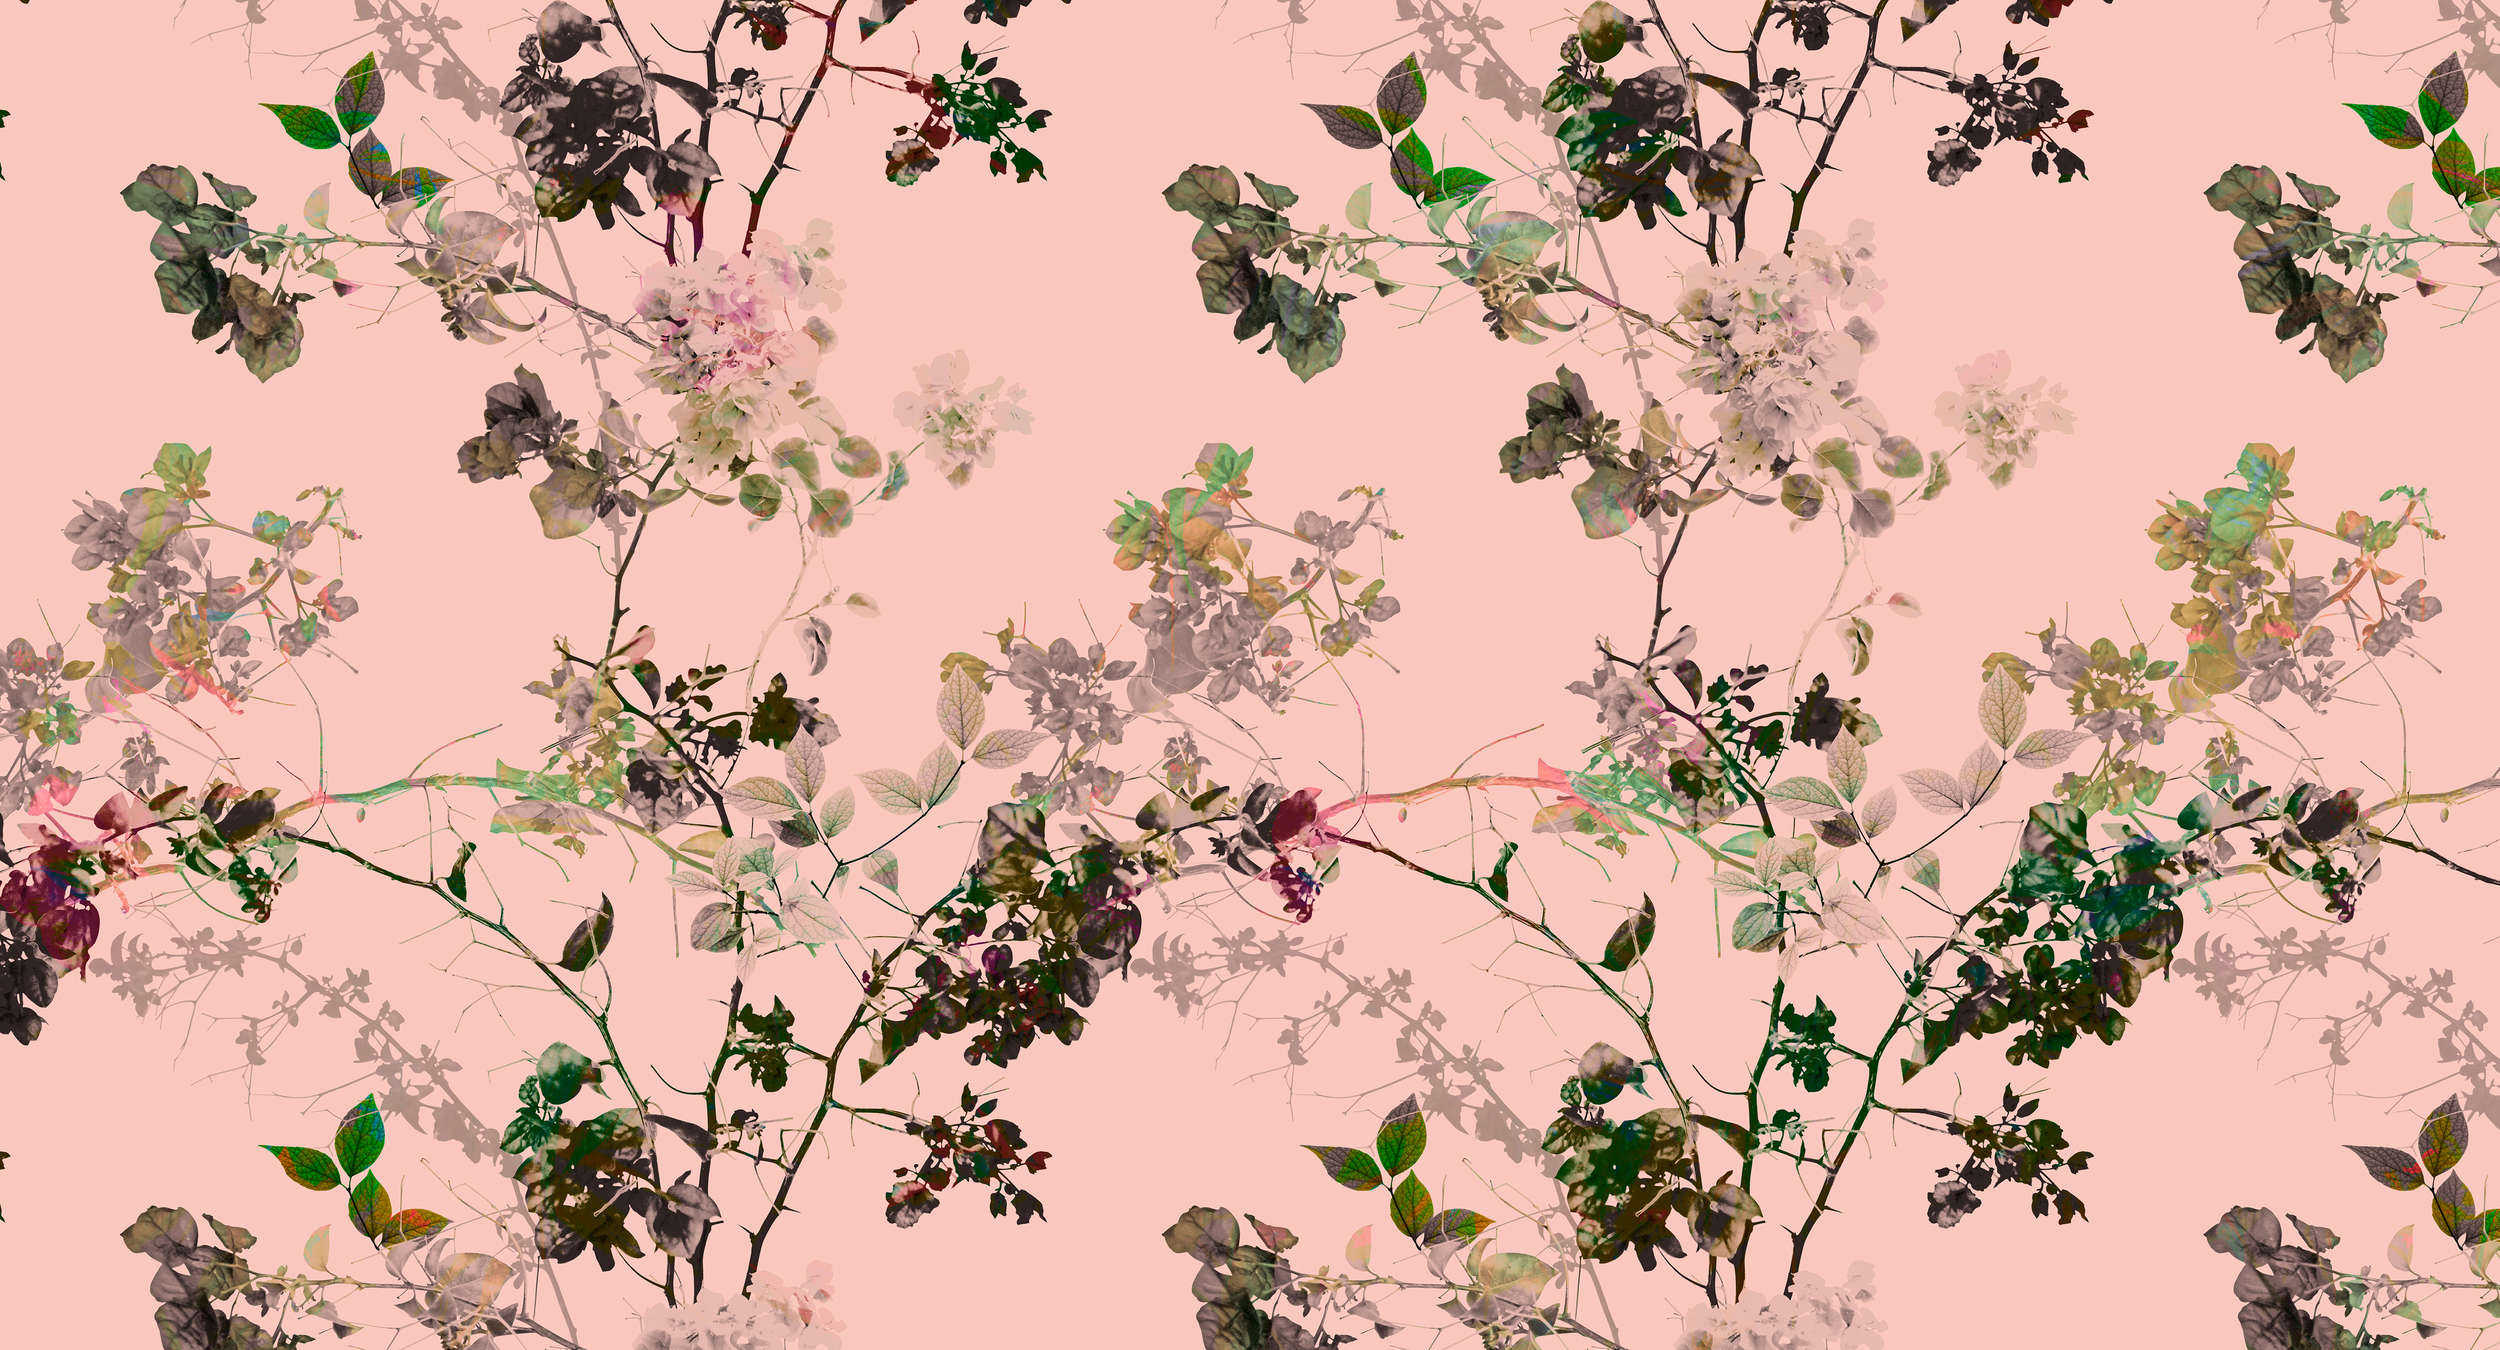             Floral mural rose branches - cream, green
        